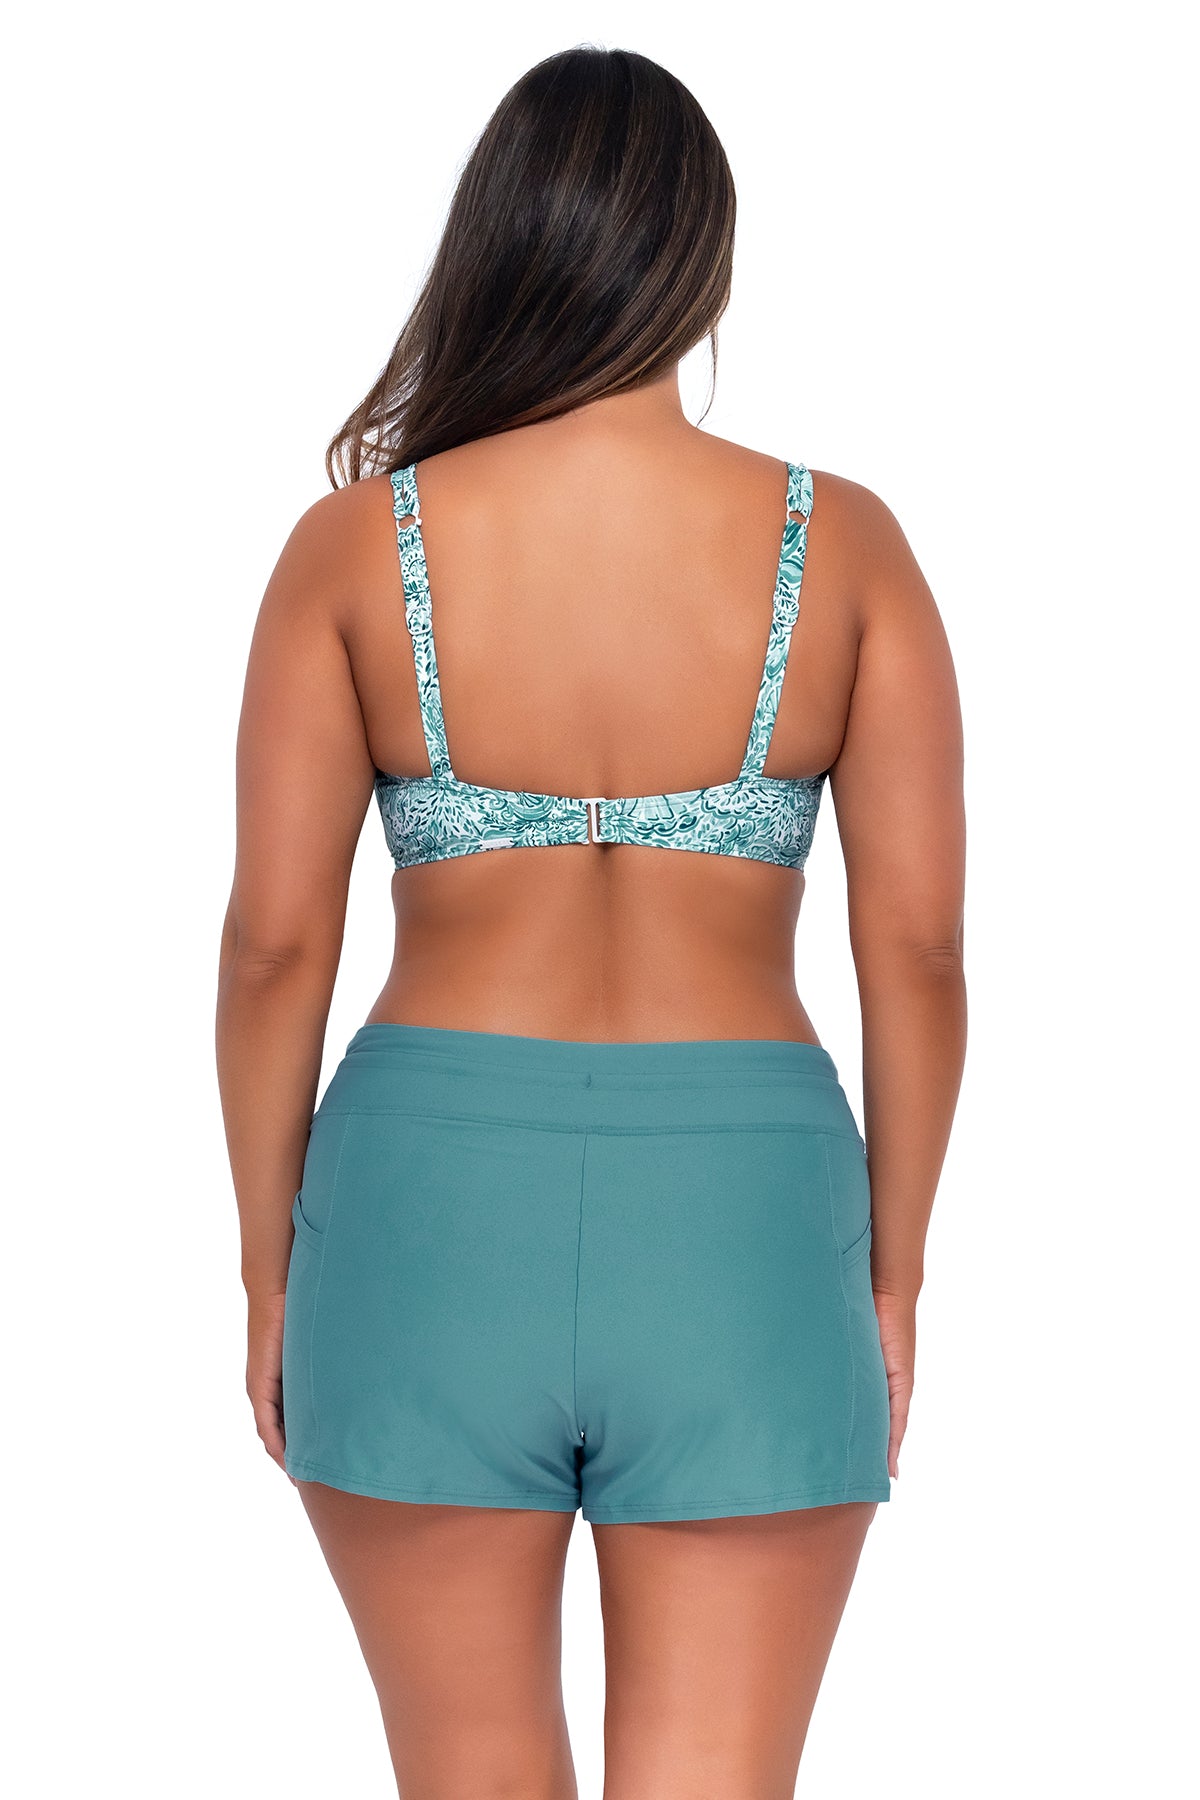 Back pose #1 of Nicky wearing Sunsets By the Sea Taylor Bralette Top paired with Laguna Swim Short women's casual wear